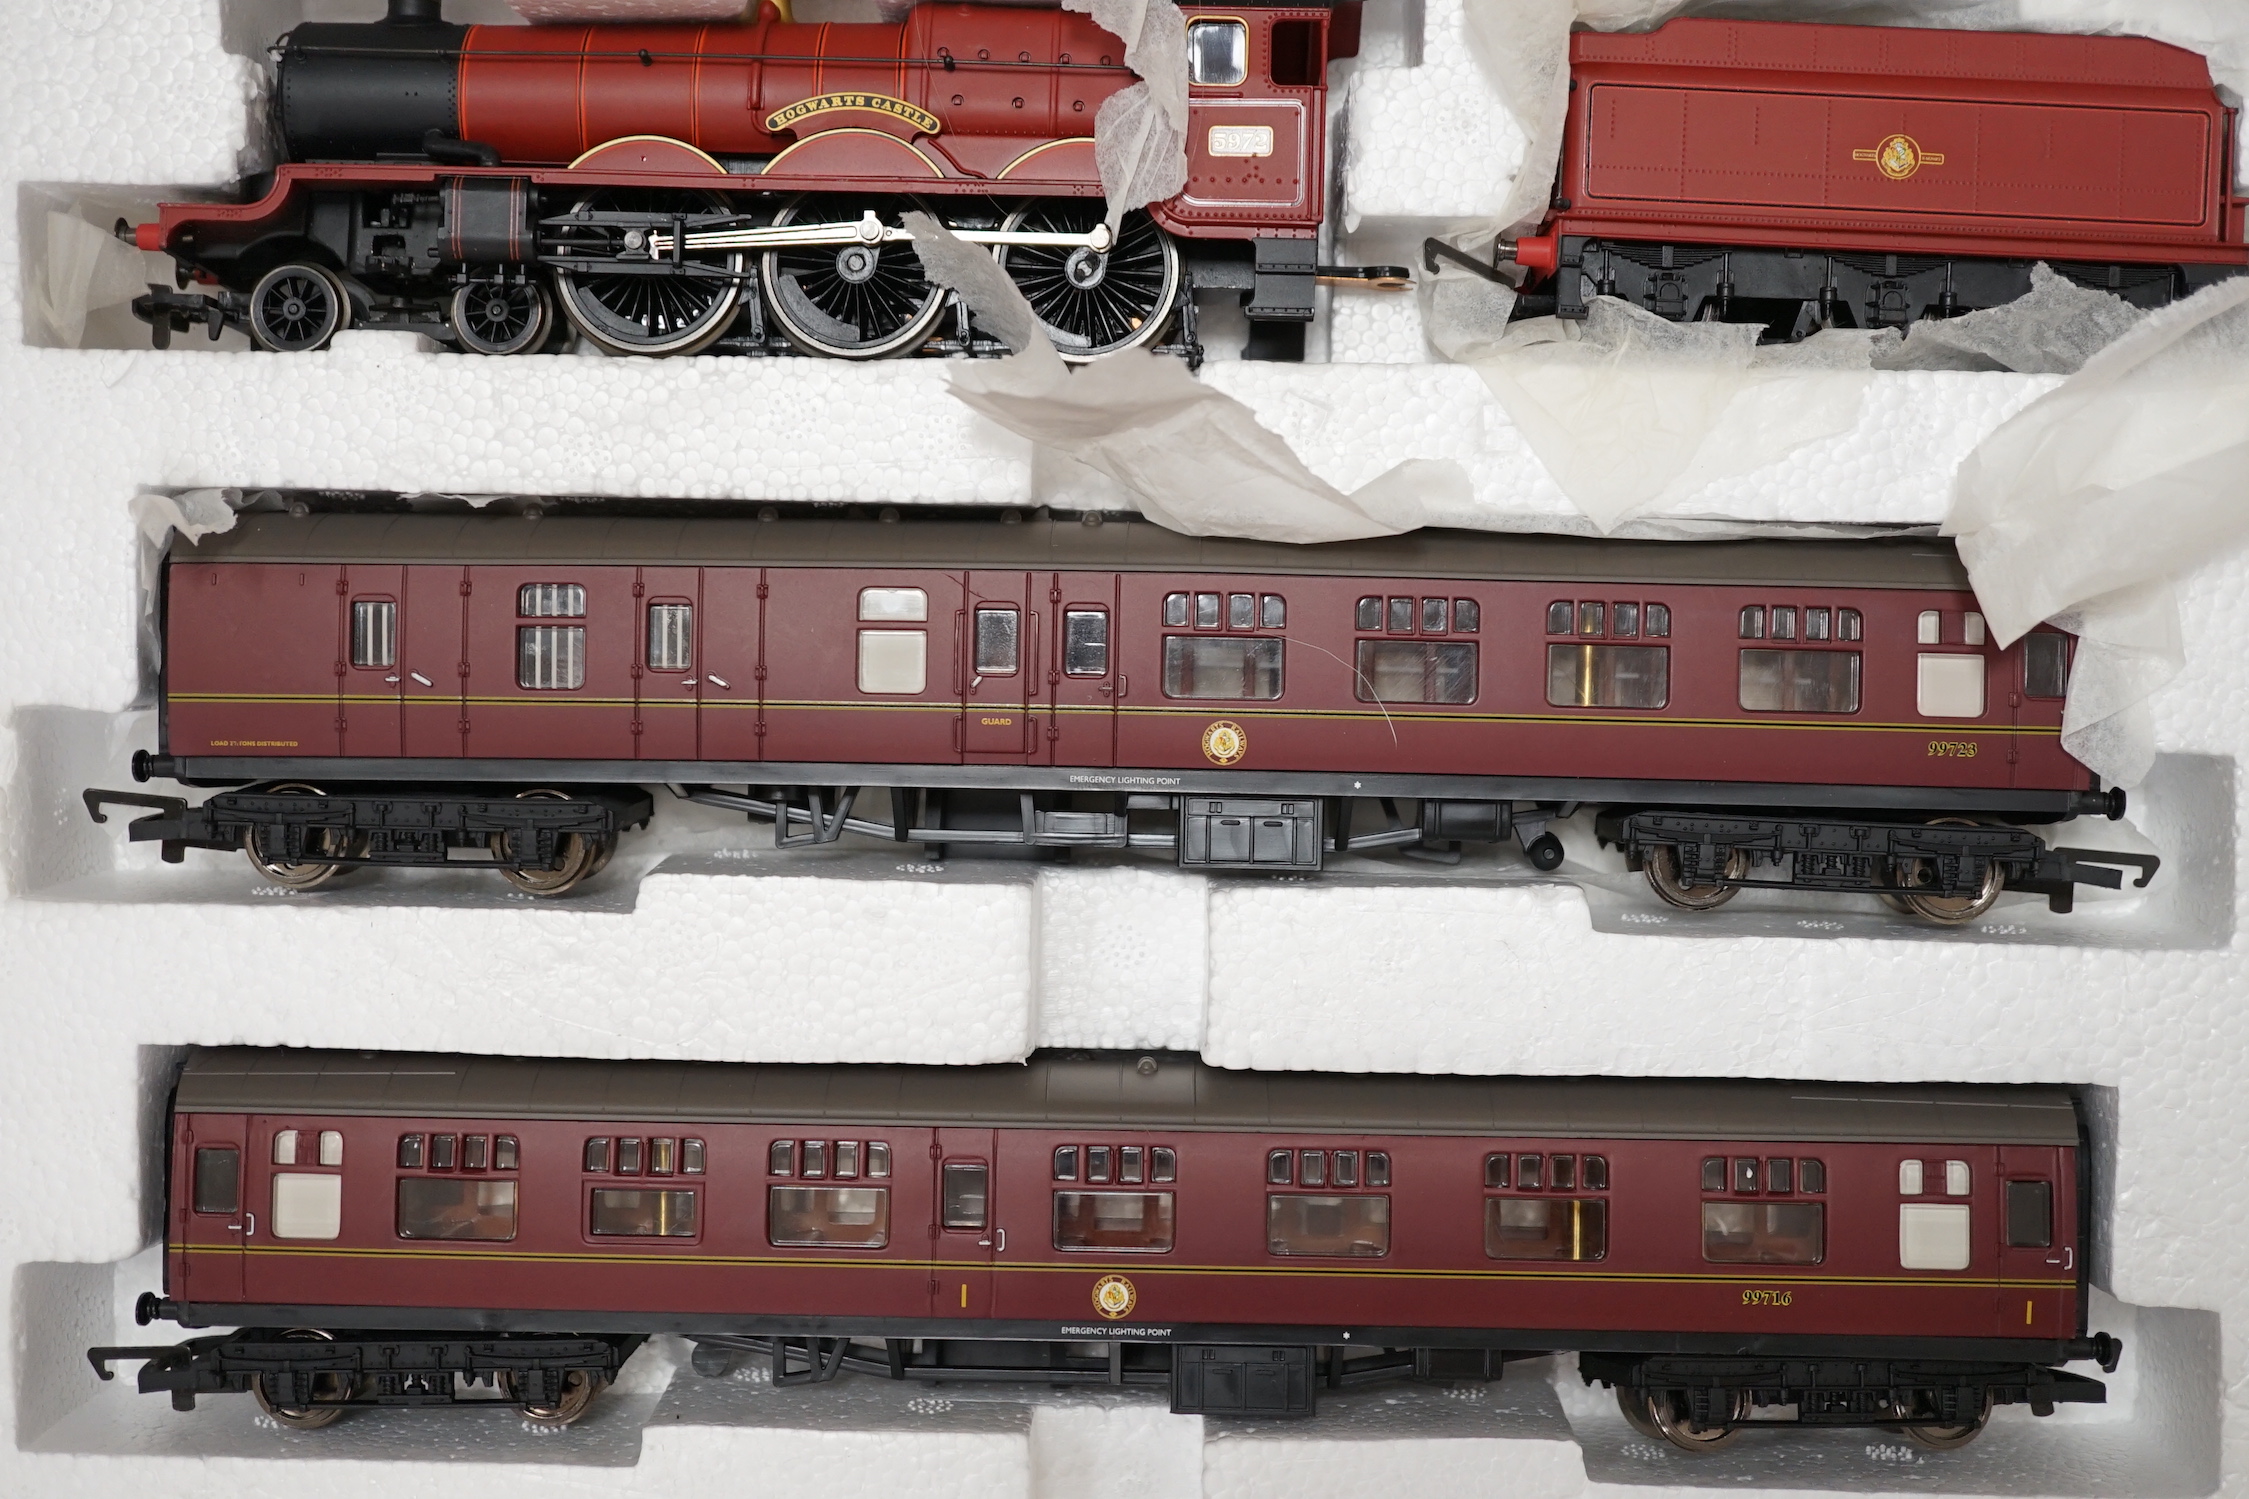 A Hornby 00 gauge Hogwarts Express Electric Train Set (R1033) from Harry Potter and the Chamber of Secrets